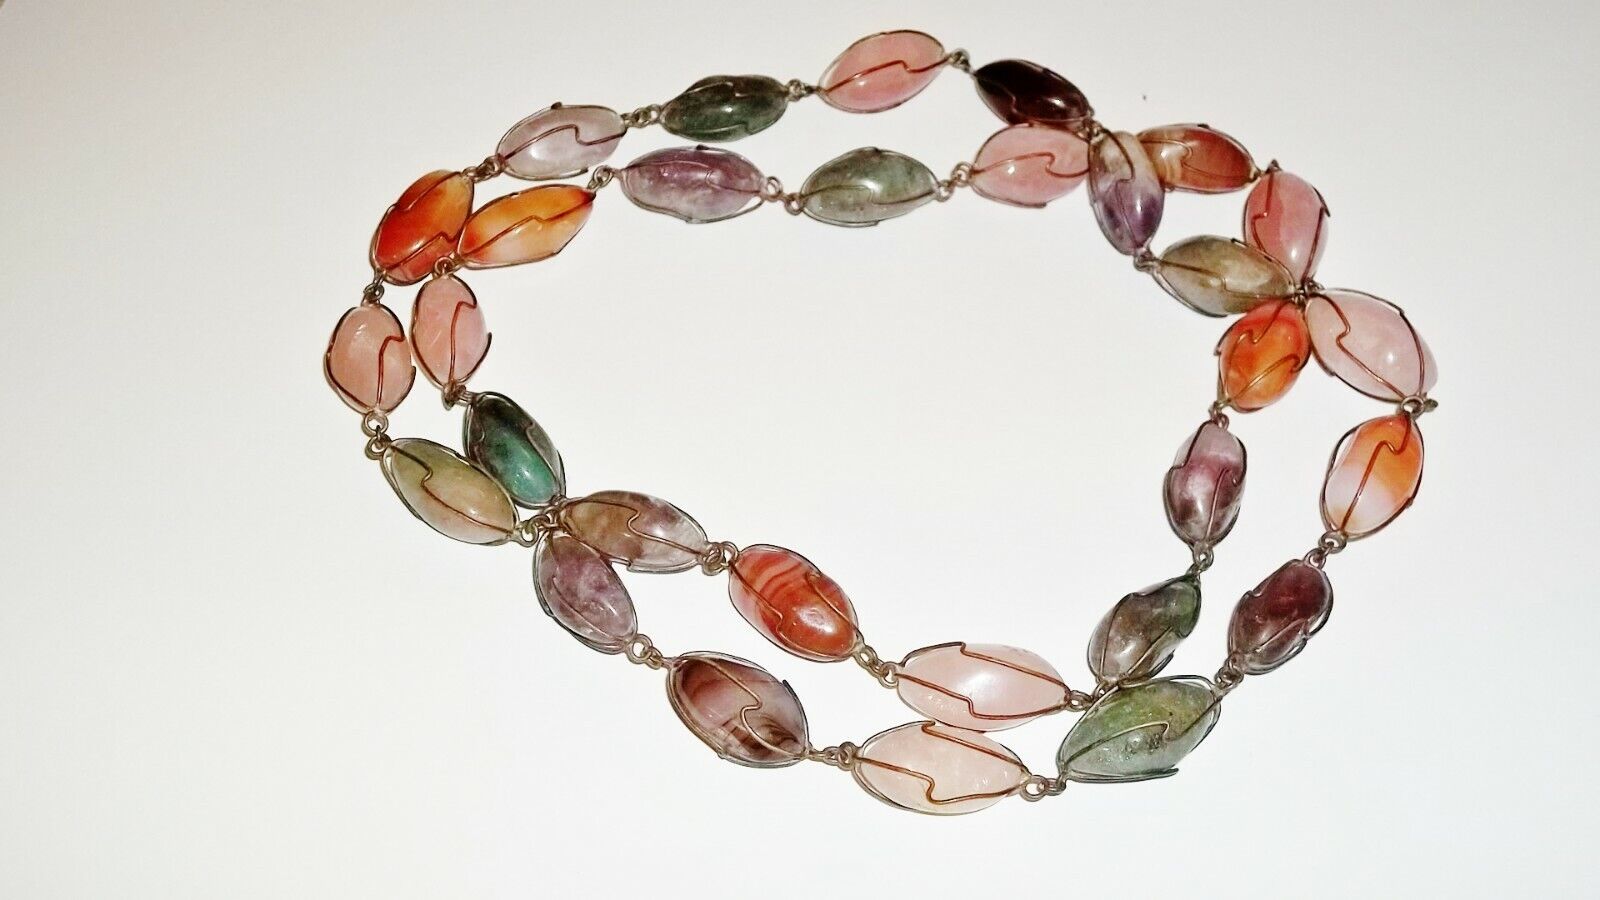 Ancient Unique Band Agate & Multi-gemstone Beads In Wire Necklace 241g - 21\